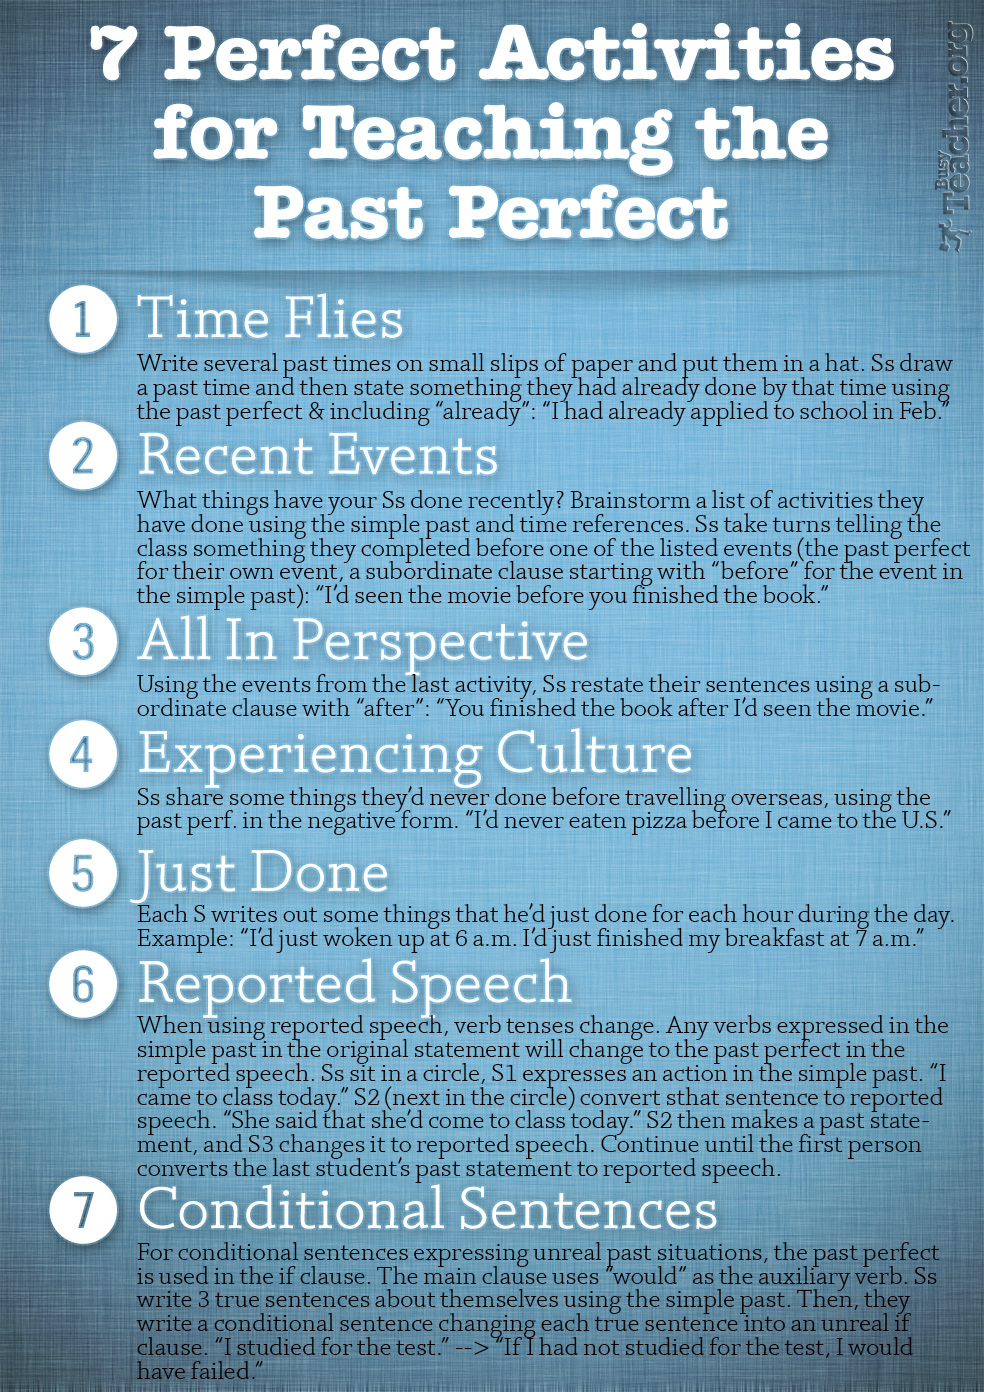 7 Perfect Activities to Teach the Past Perfect: Poster